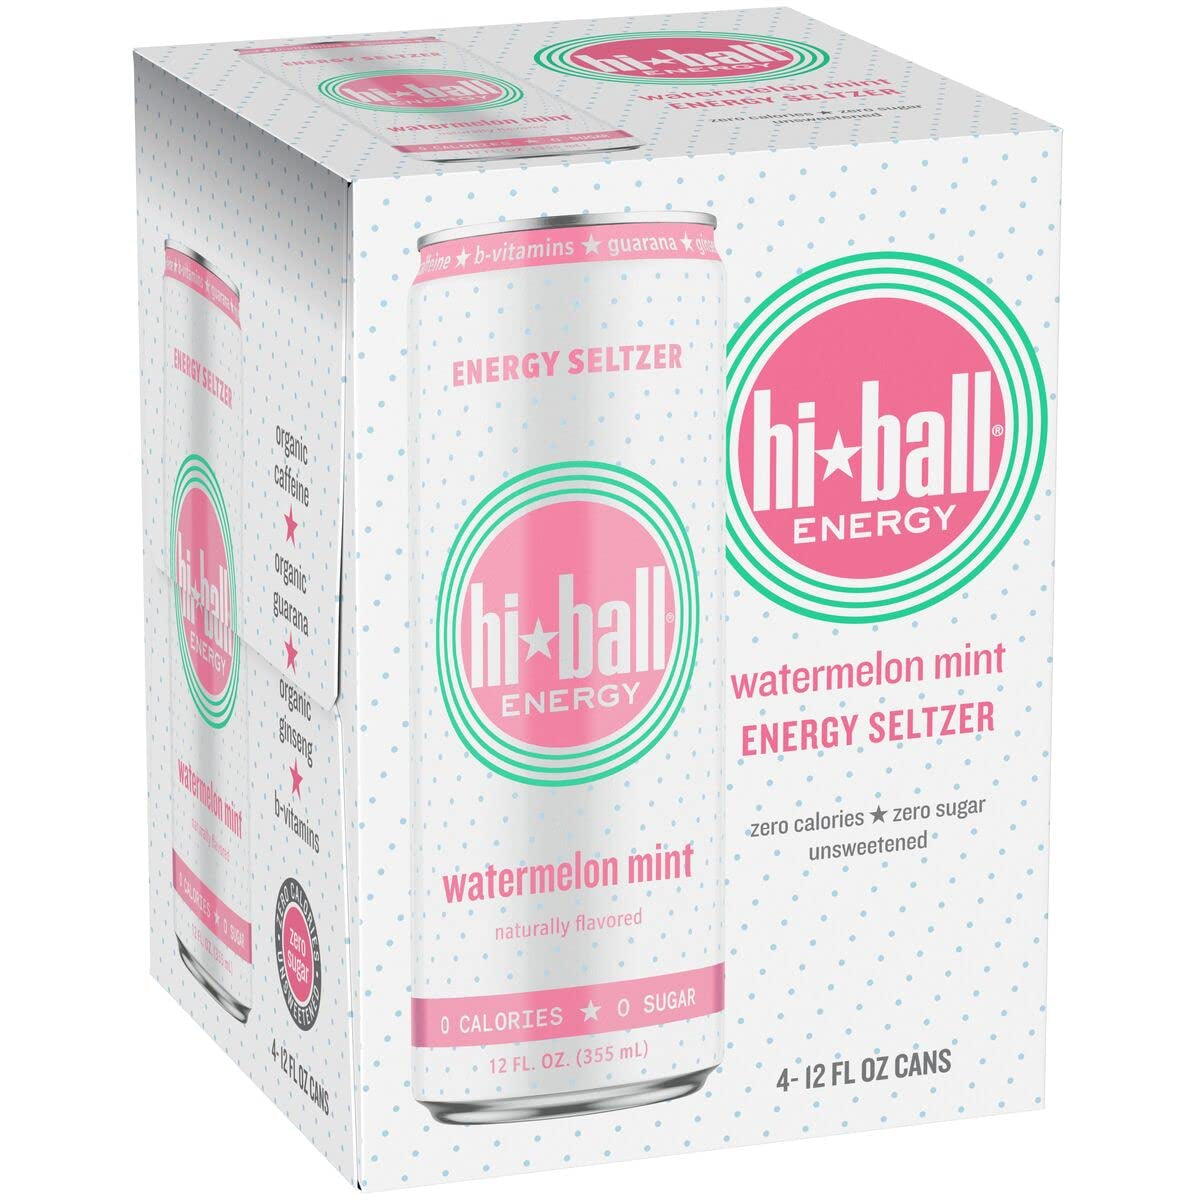 Hiball Energy Seltzer Water, Caffeinated Sparkling Water Made with Vitamin B12 and Vitamin B6, Sugar Free (4 Pack of 12 Fl Oz), Watermelon Mint